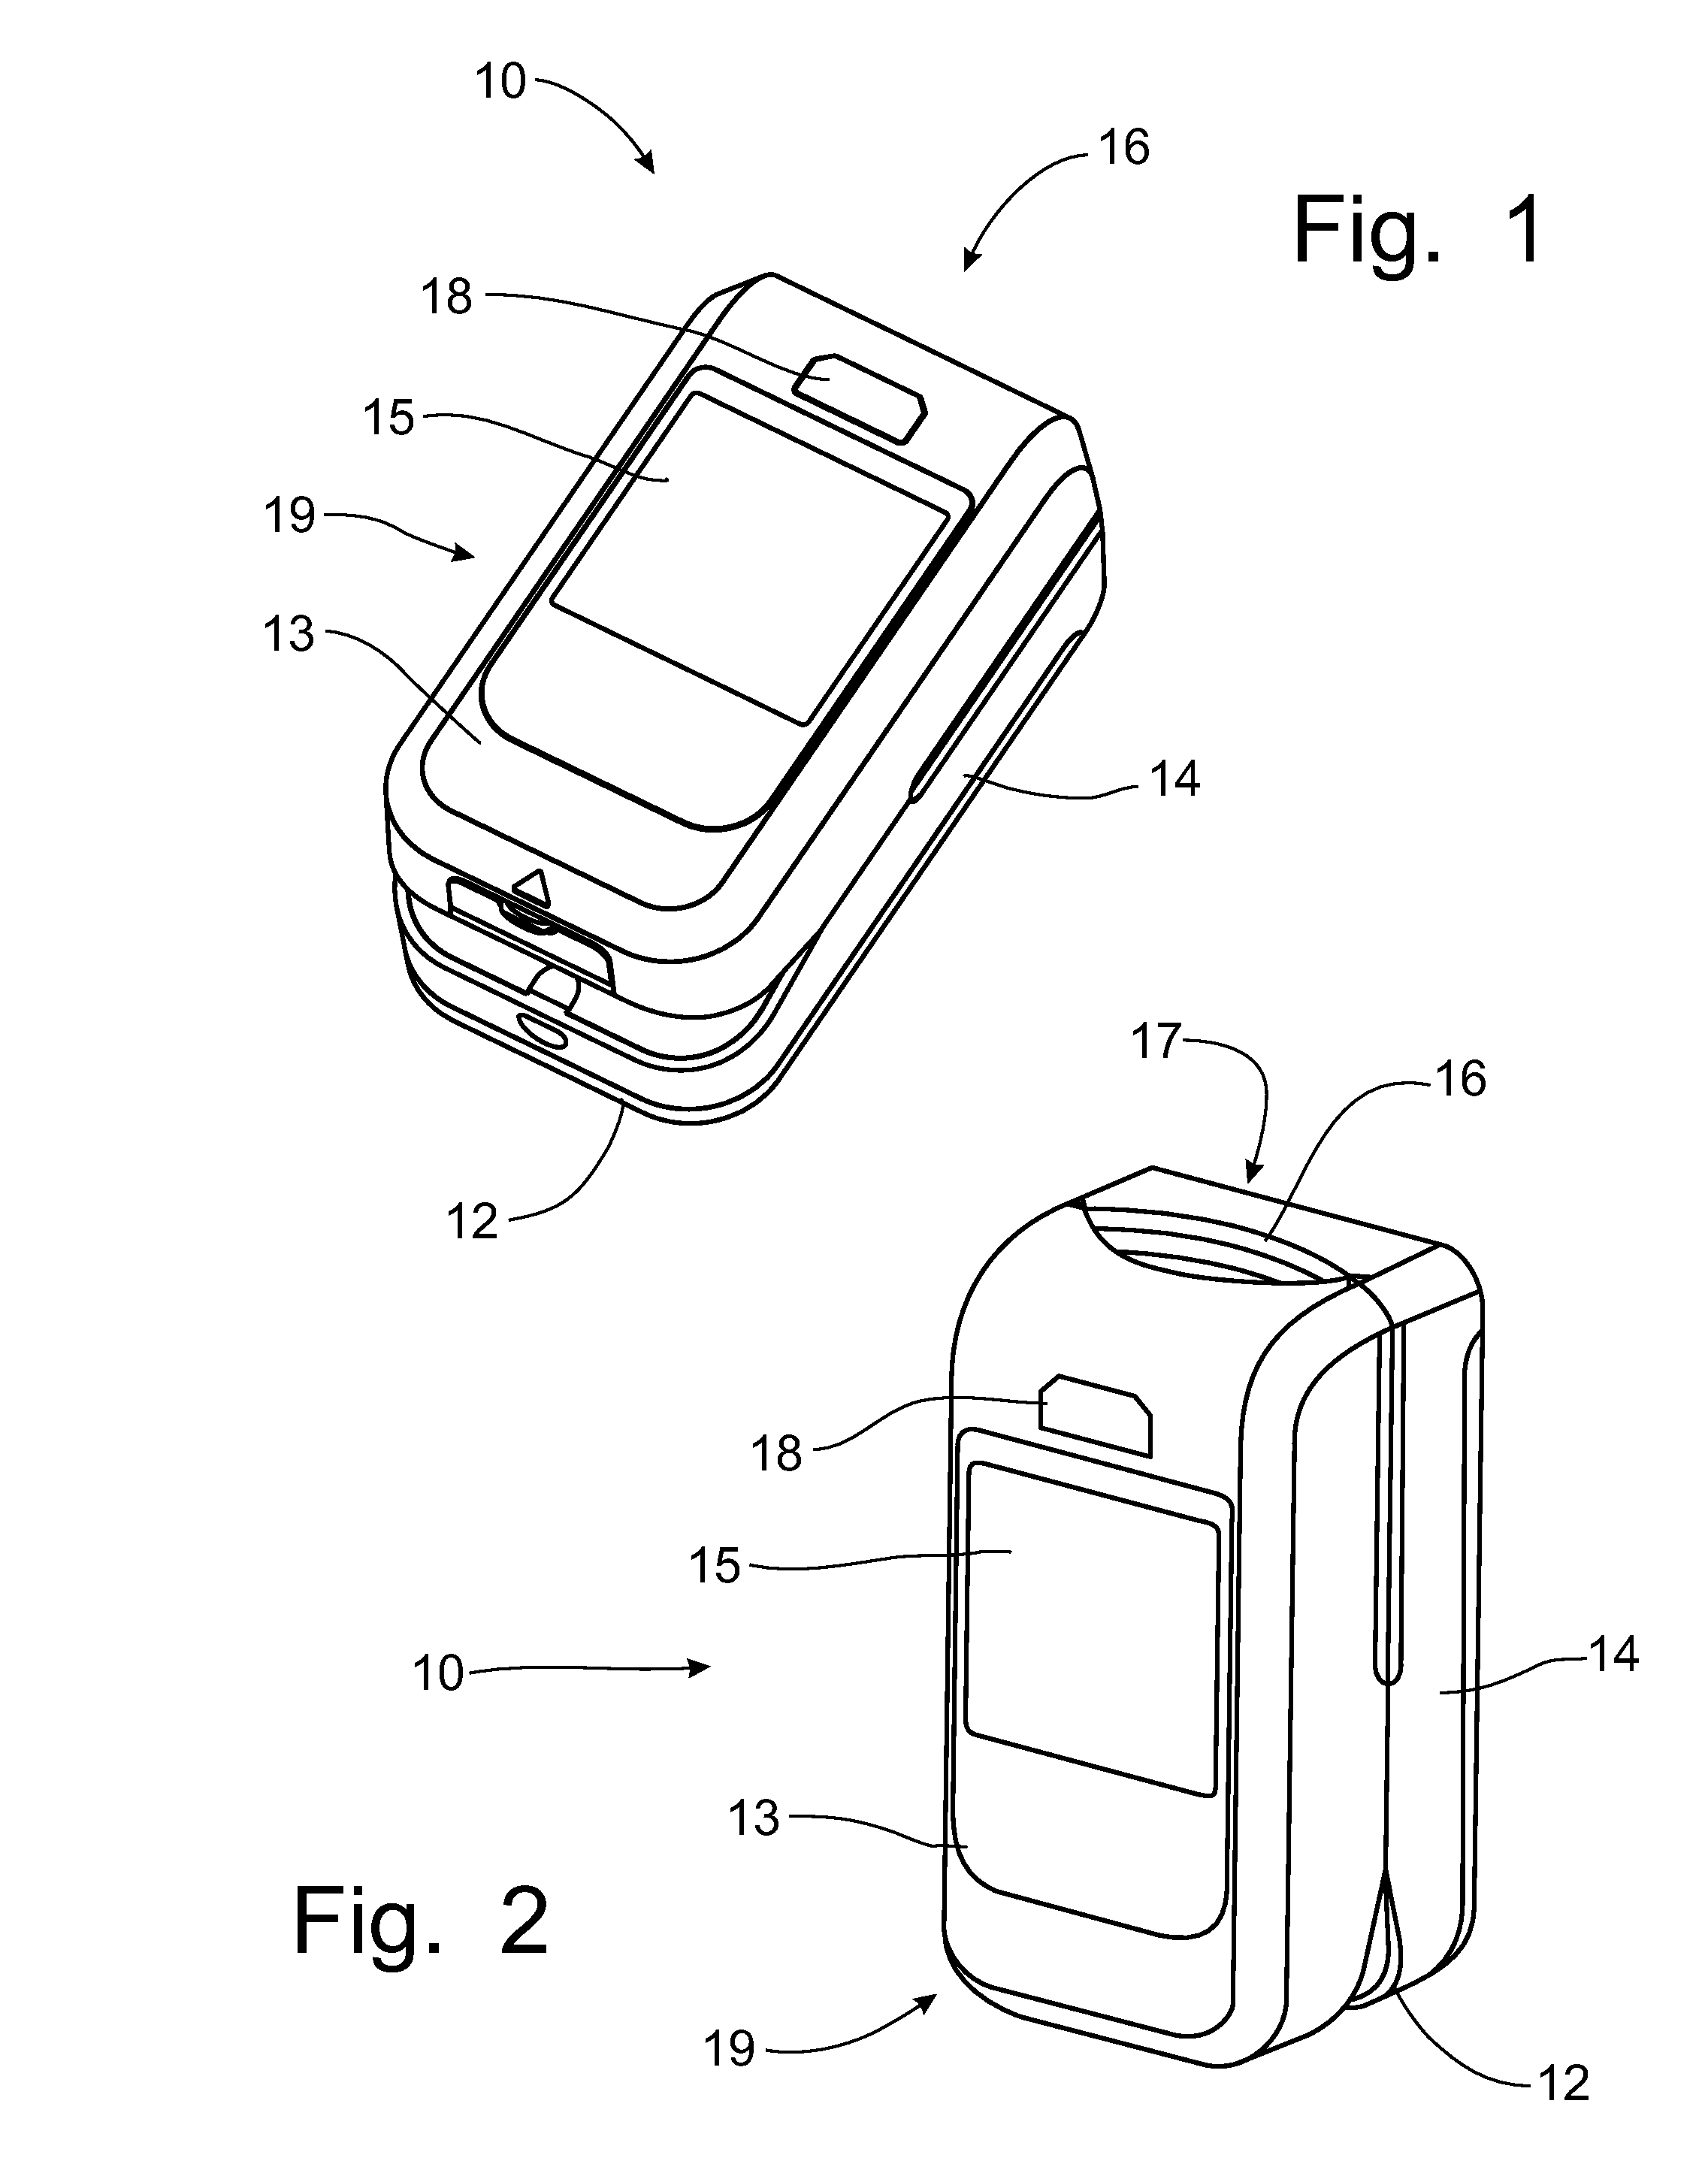 Method and Apparatus for Managing Stress